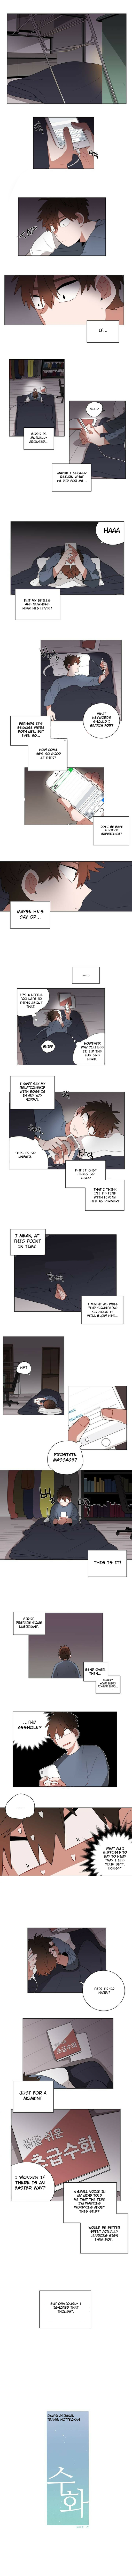 Signal - Page 1